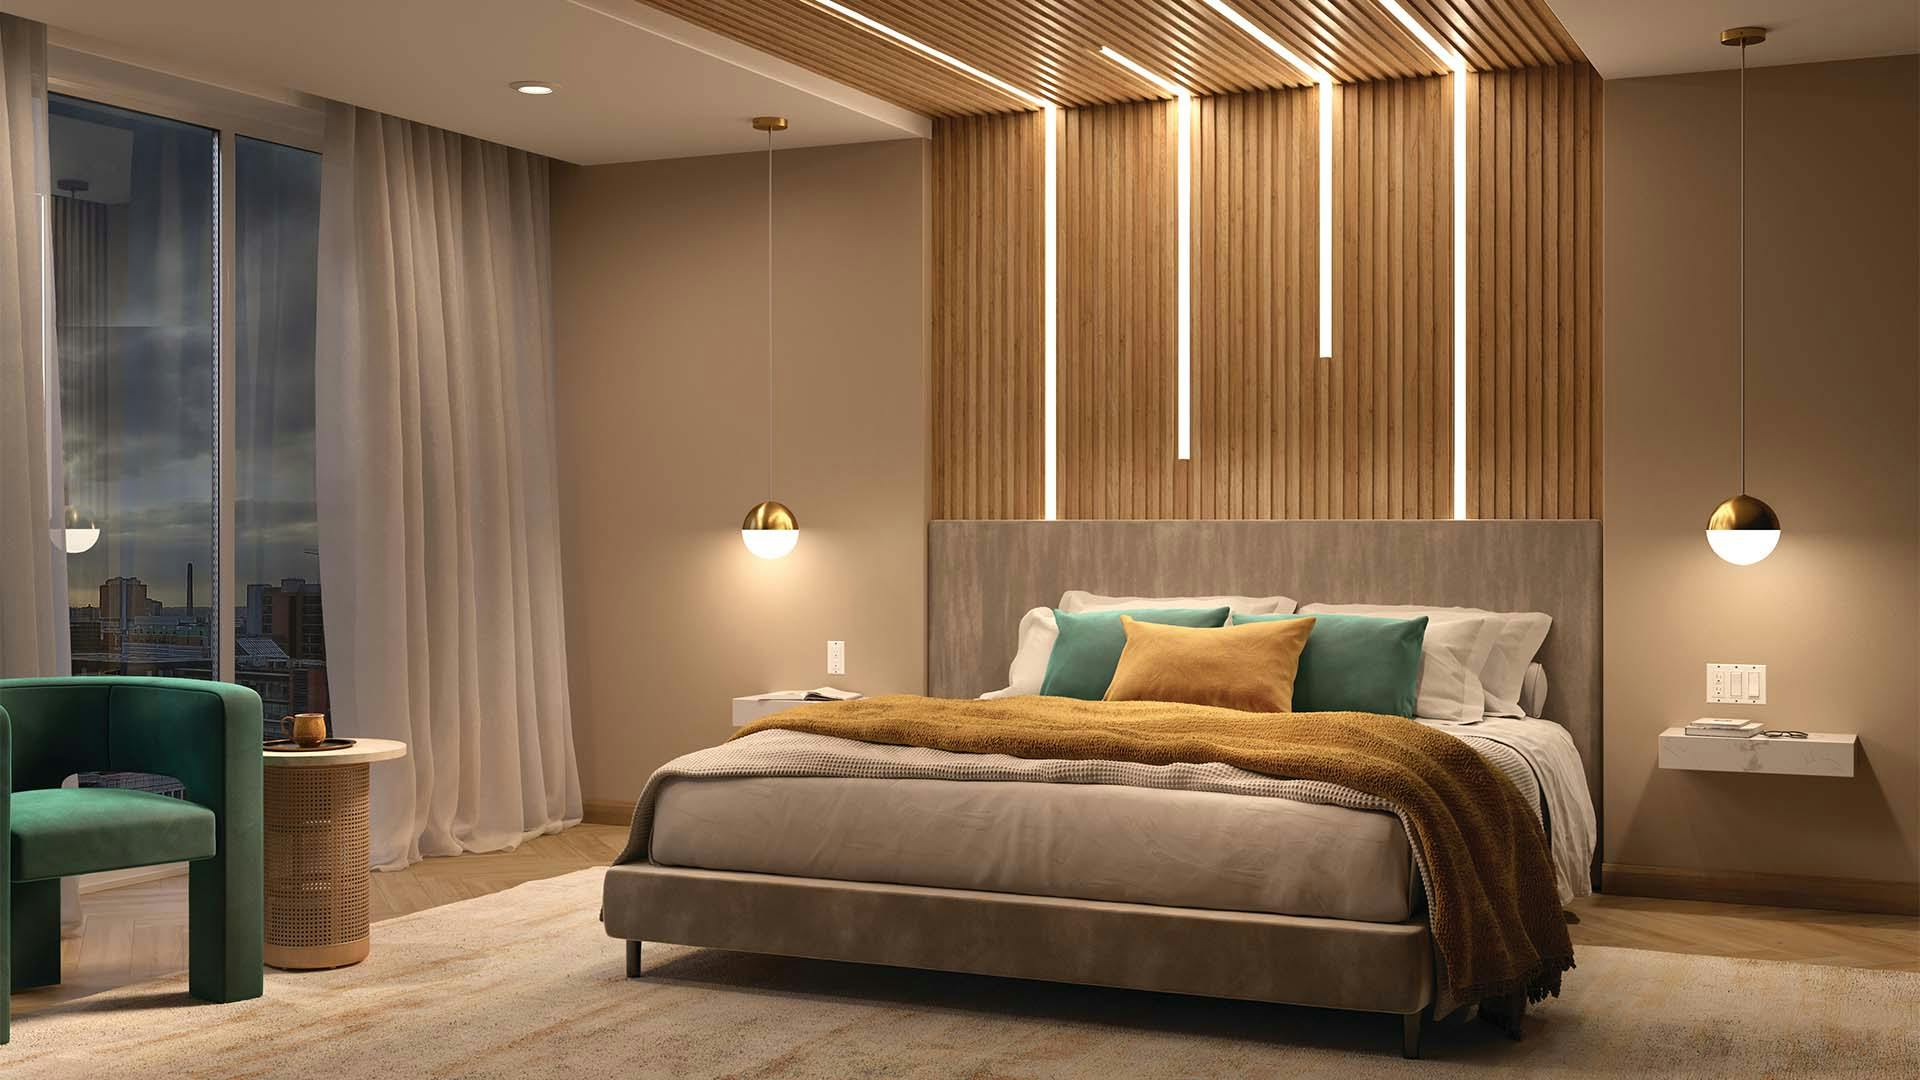 Bedroom at night with Channel lights embedded in the ceiling